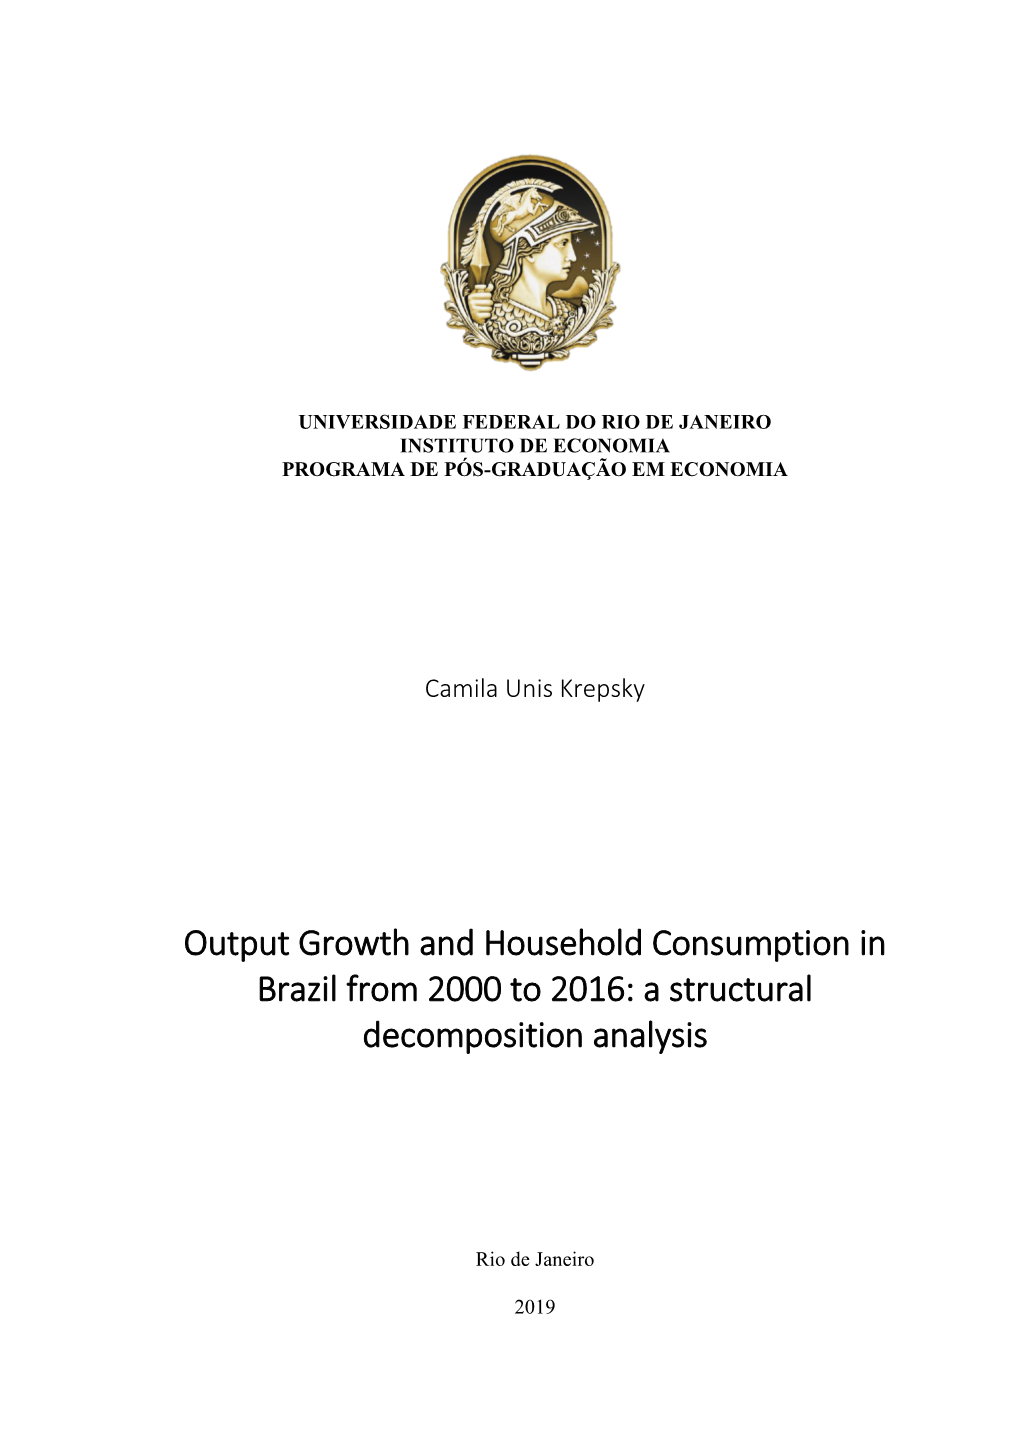 Output Growth and Household Consumption in Brazil from 2000 to 2016: a Structural Decomposition Analysis